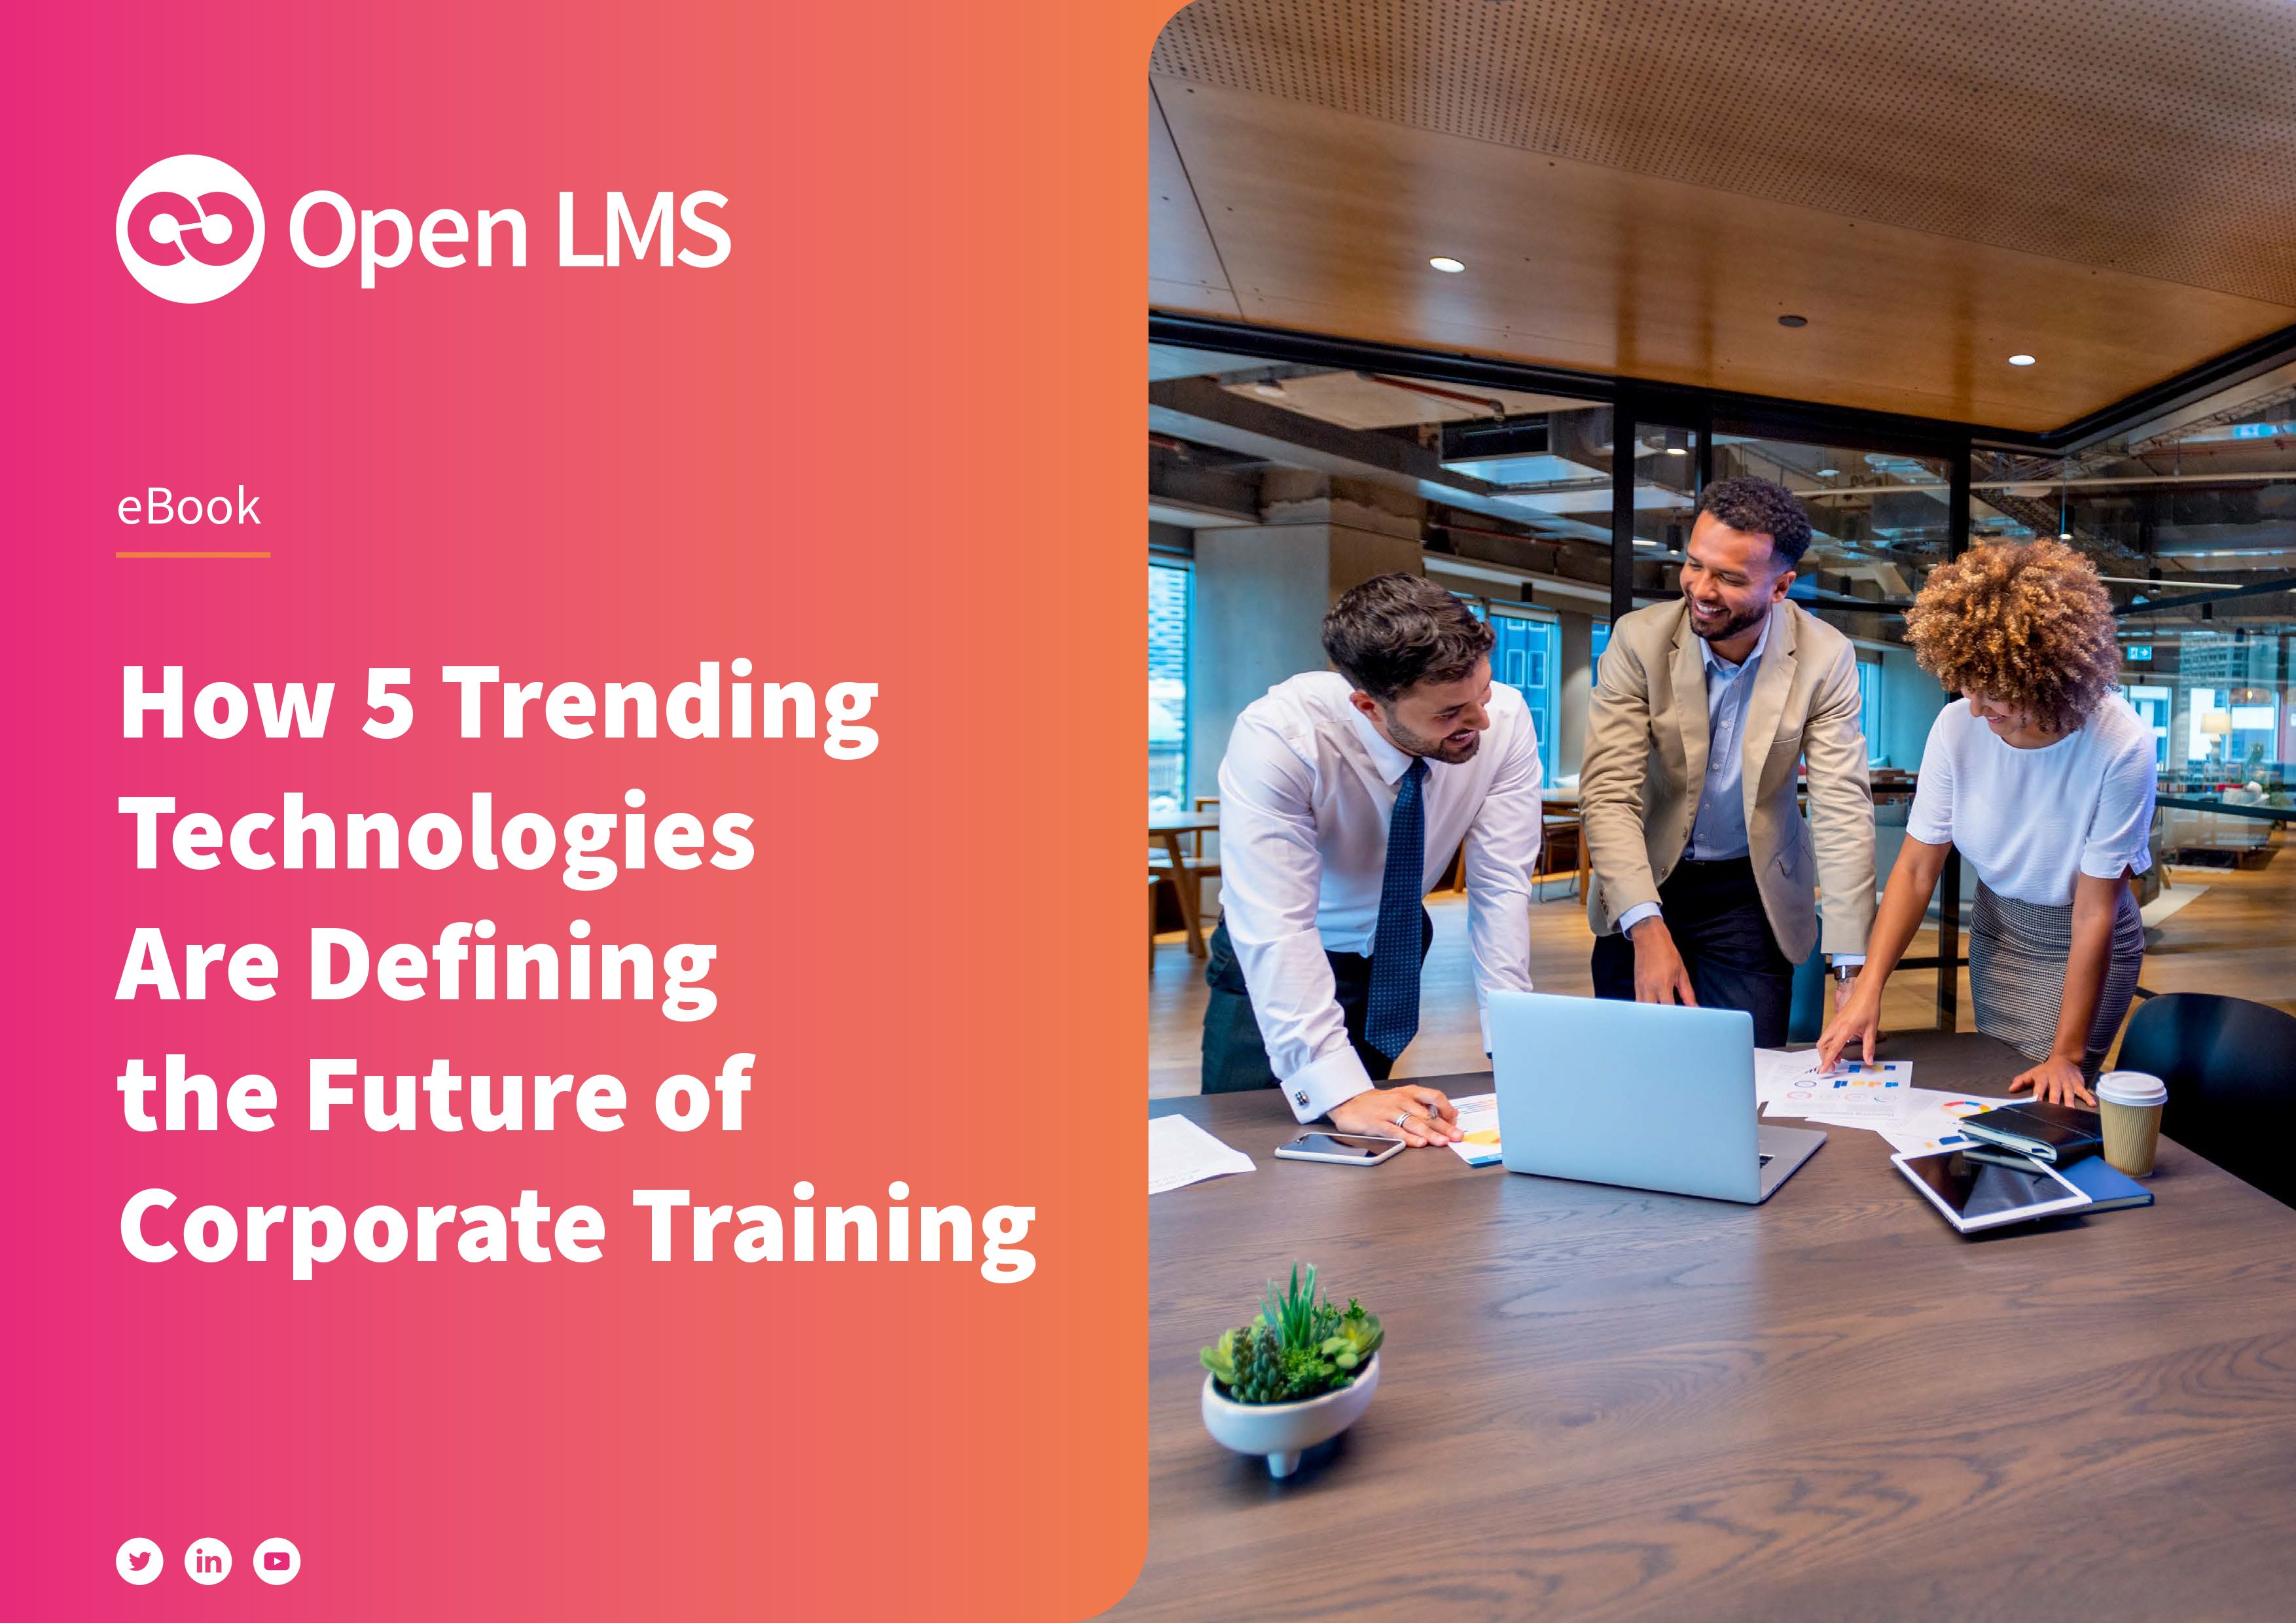 How 5 Trending Technologies and Are Defining the Future of Corporate Training